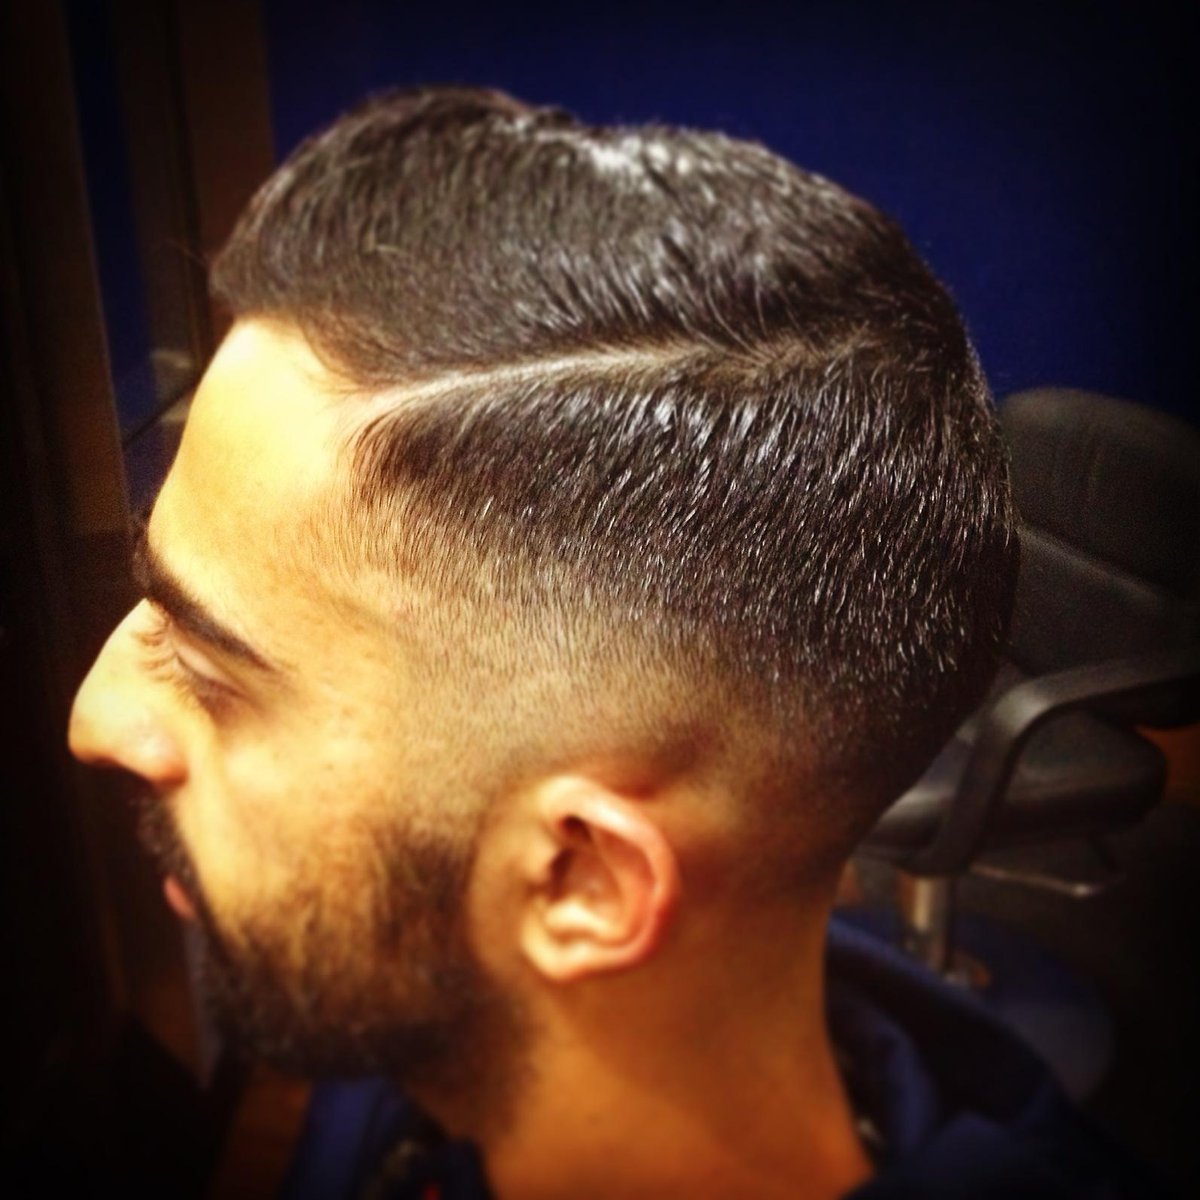 Imale Salon For Men On Twitter Check Out This Baldfade With A Deeppart By One Of Our Stylist Fatima Book Now Before The Holiday Rush Http T Co B35ydx9sx2